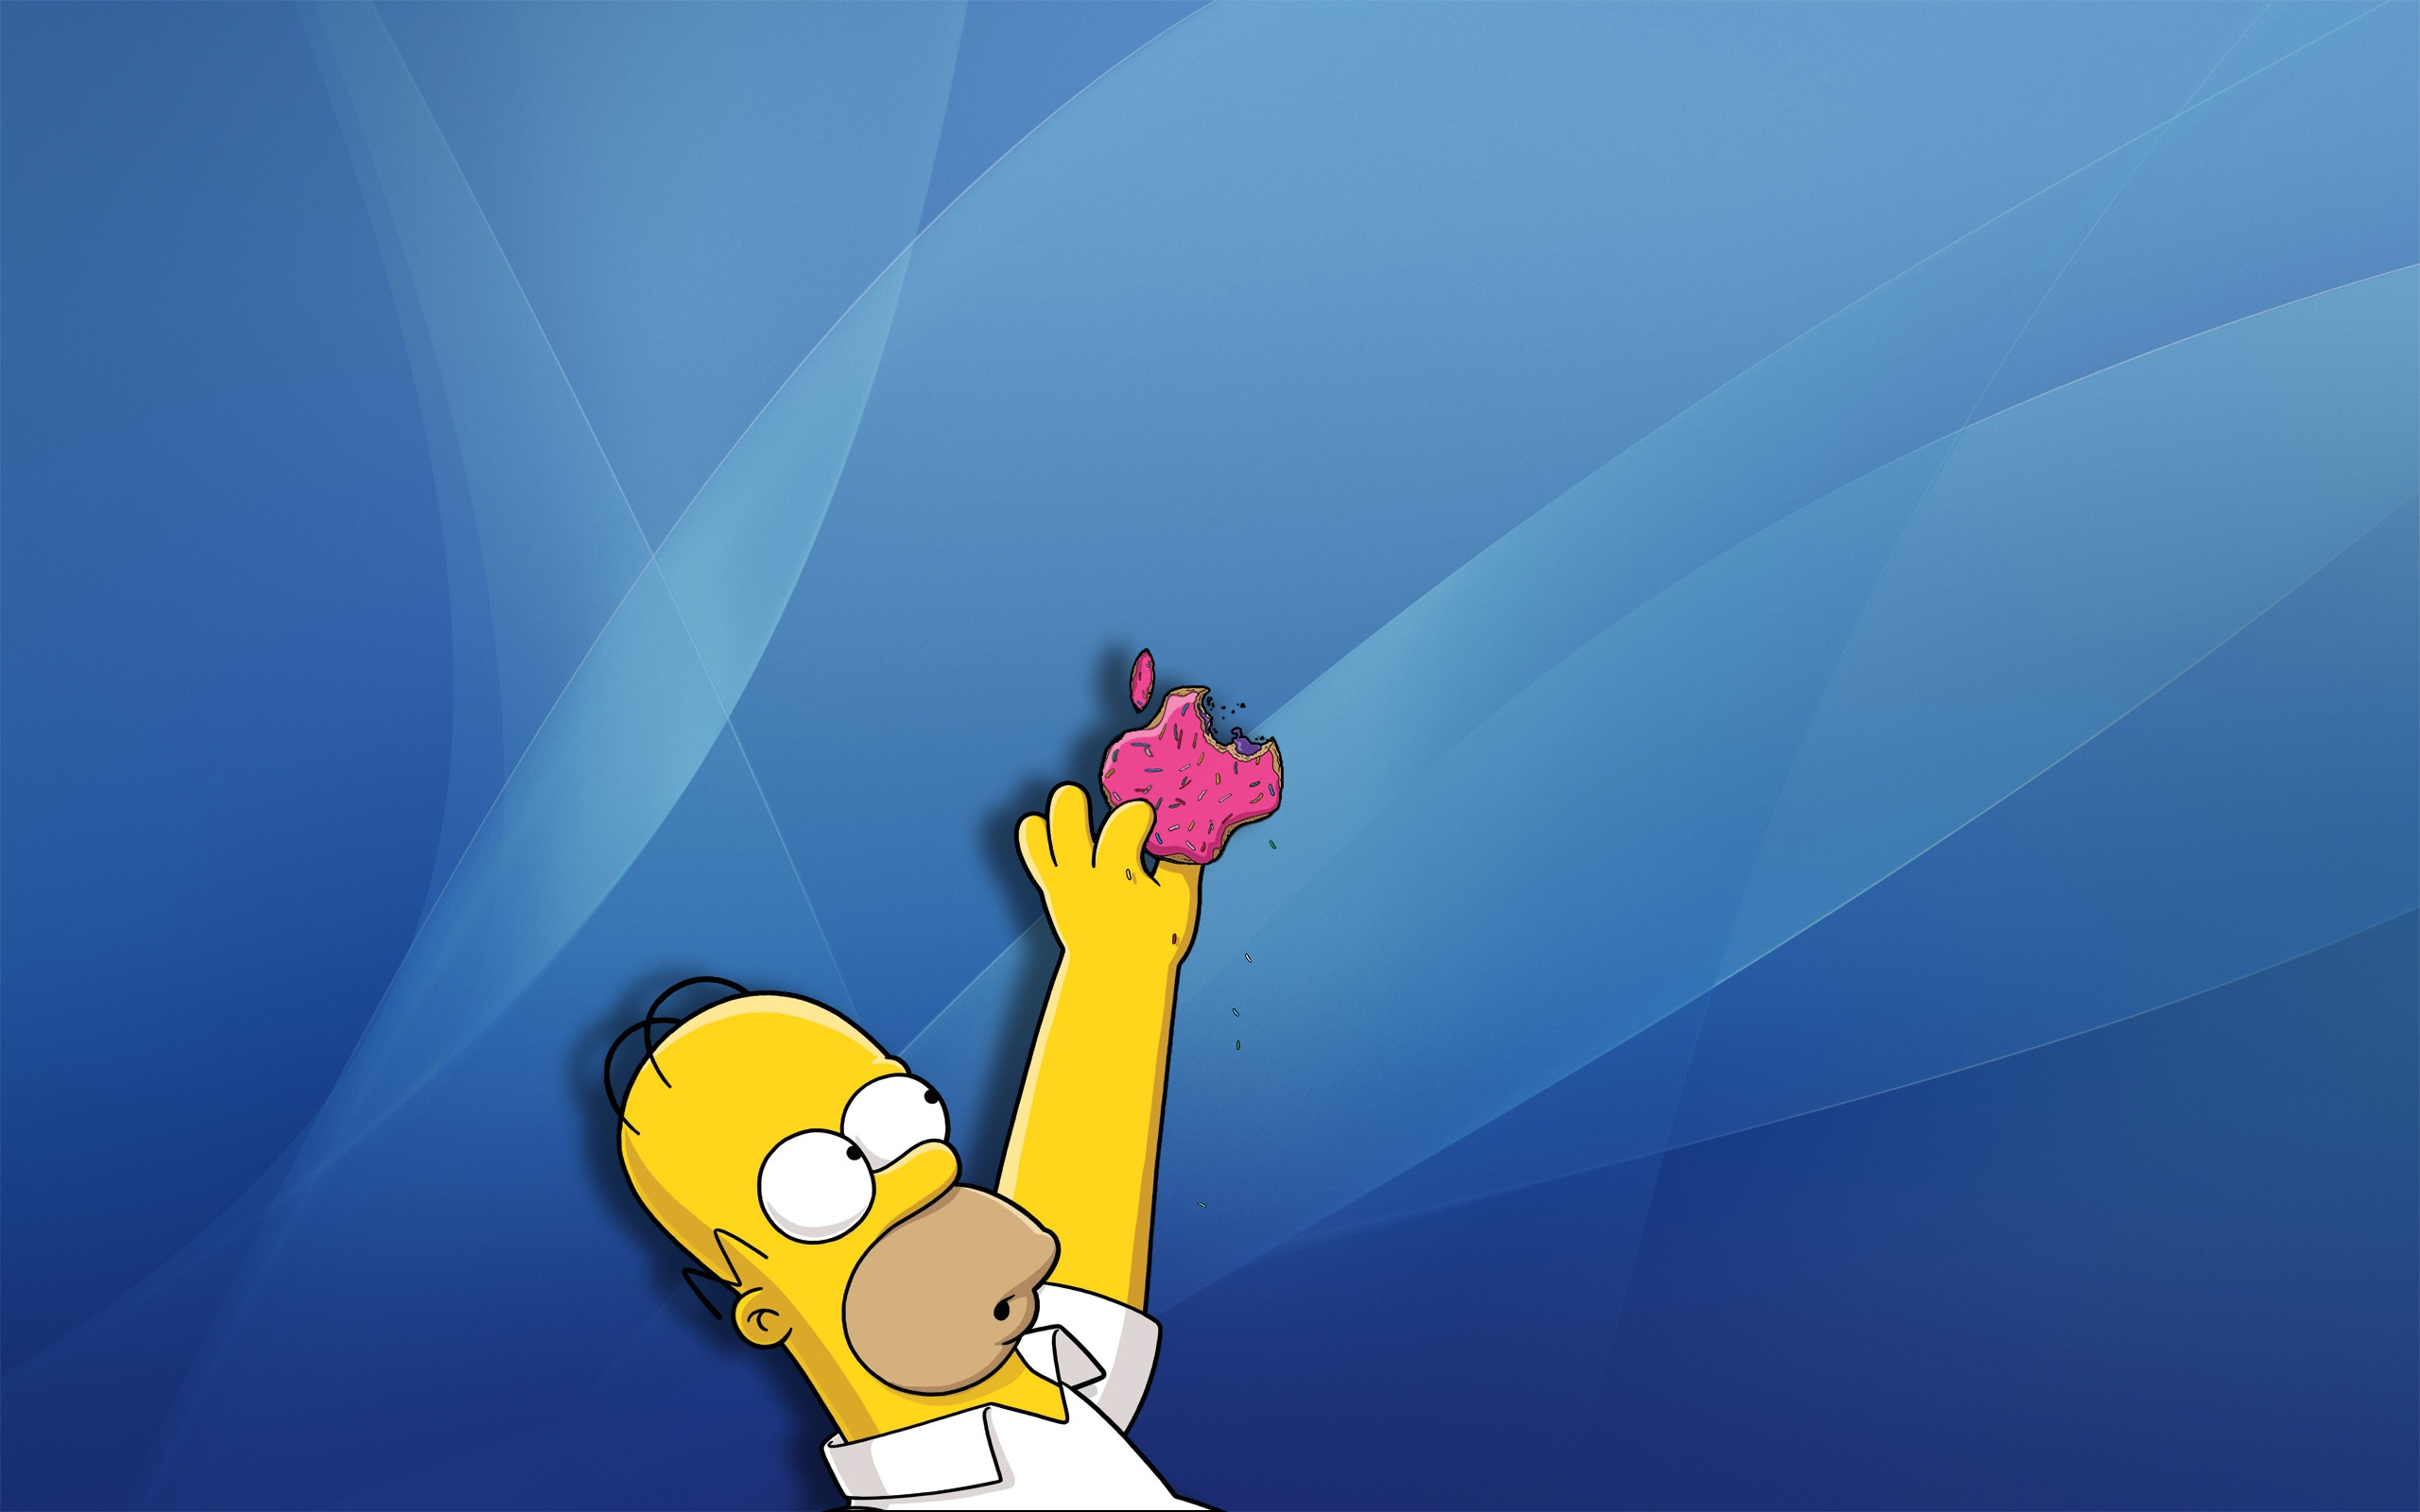 Homer Simpson holding an Apple logo doughnut - a playful reference to Apple Inc.